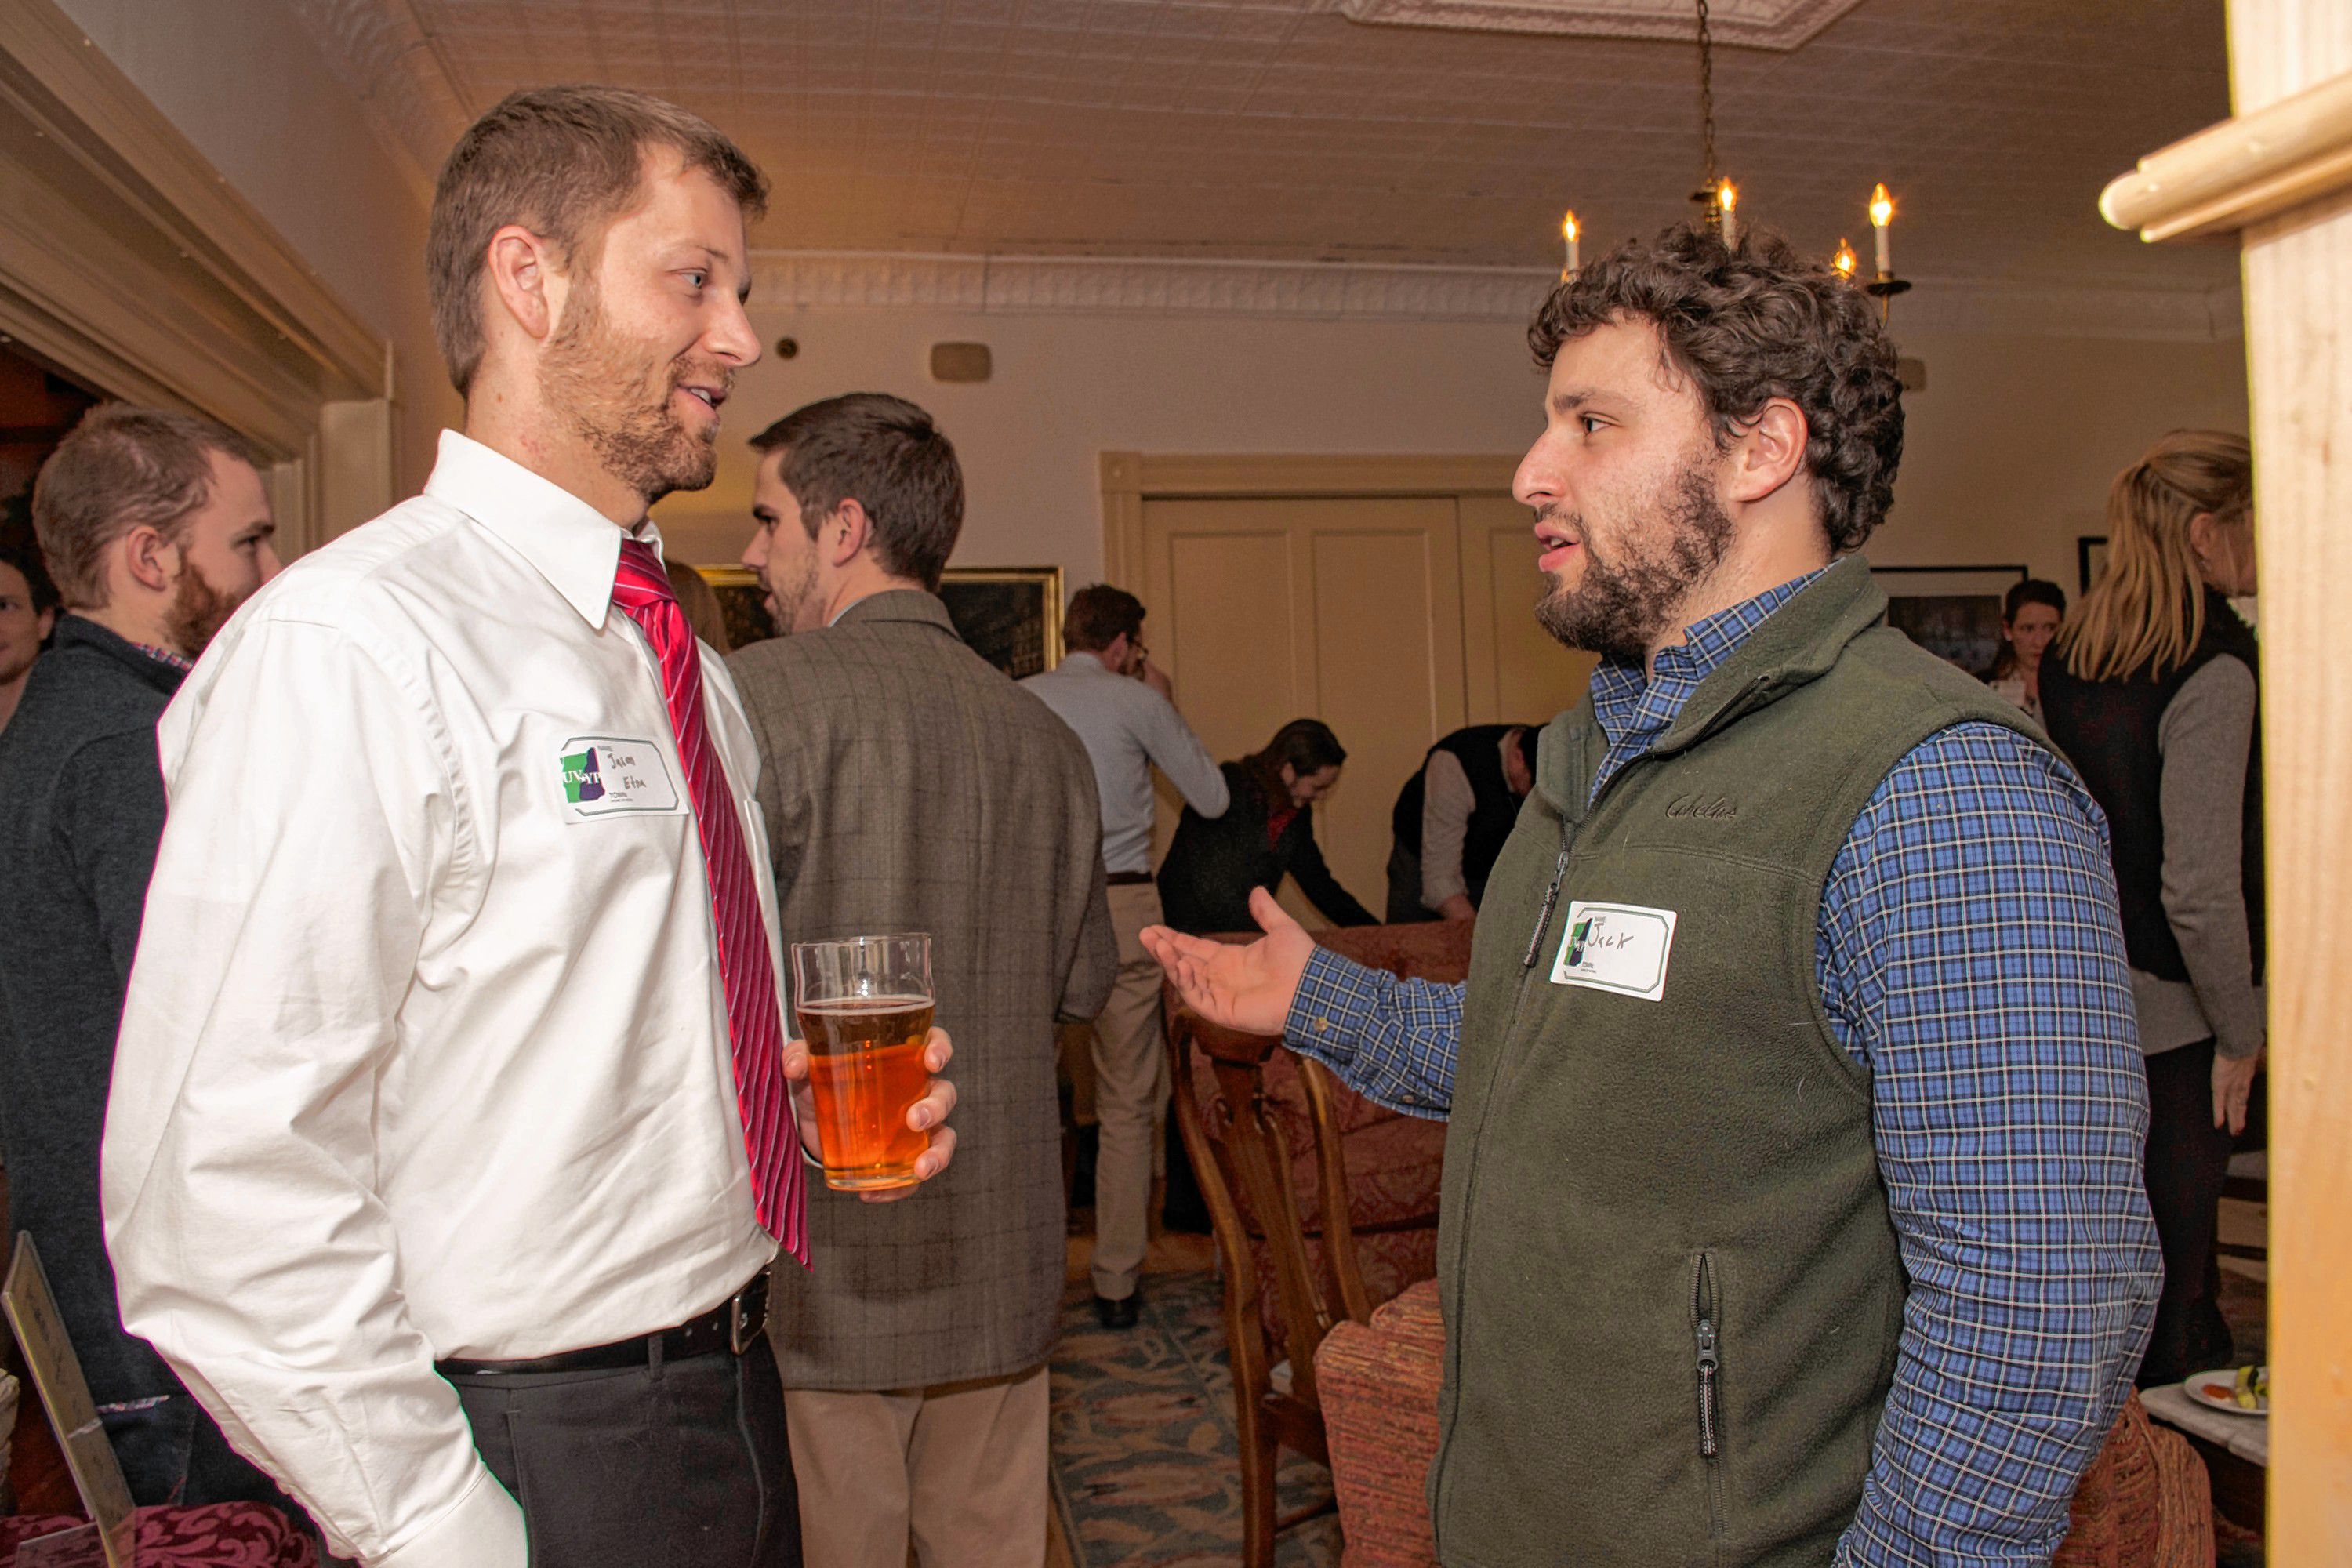 Jason Kendall, of Etna, an accountant at Gallagher, Flynn & Co, chats with Jack Kaunders, a lawyer living in Thetford, at the Upper Valley Young Professionals holiday party and canned food drive at the Norwich Inn on Dec. 15. (Nancy Nutile-McMenemy photograph, photosbynanci@comcast.net)